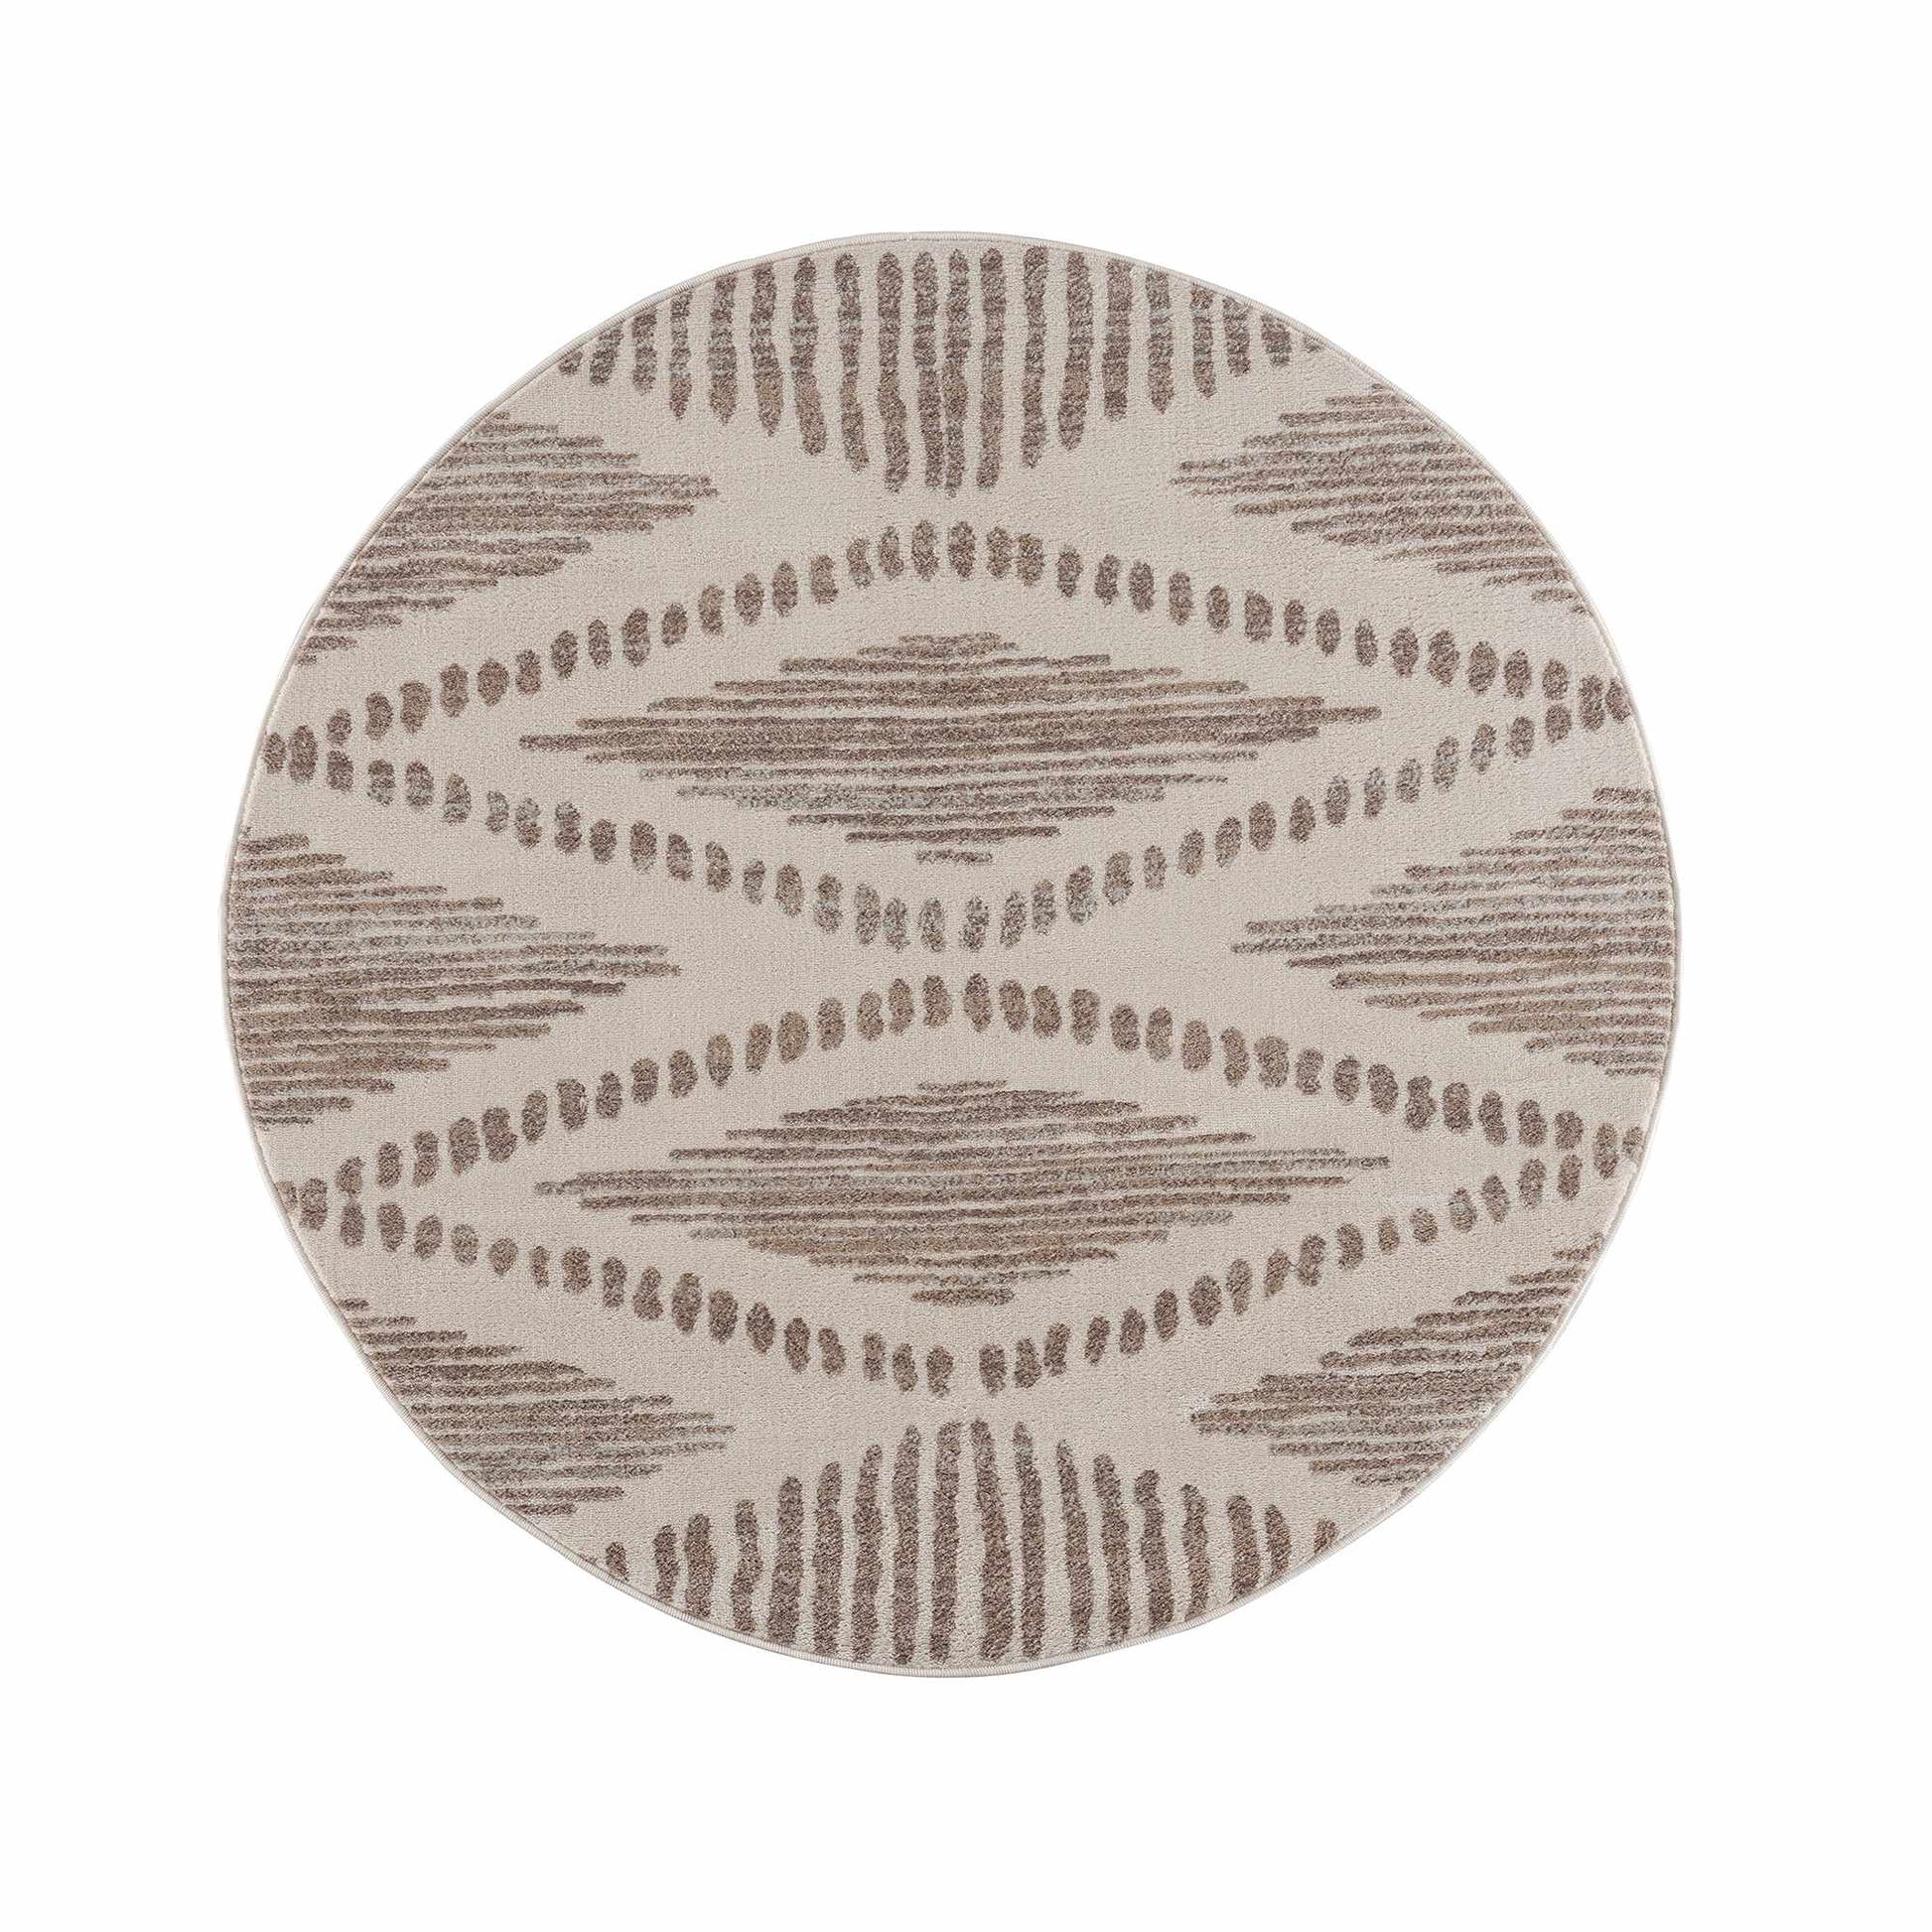 Boutique Rugs Rugs 7'10" Round Tigrisis Beige 2328 Area Rug